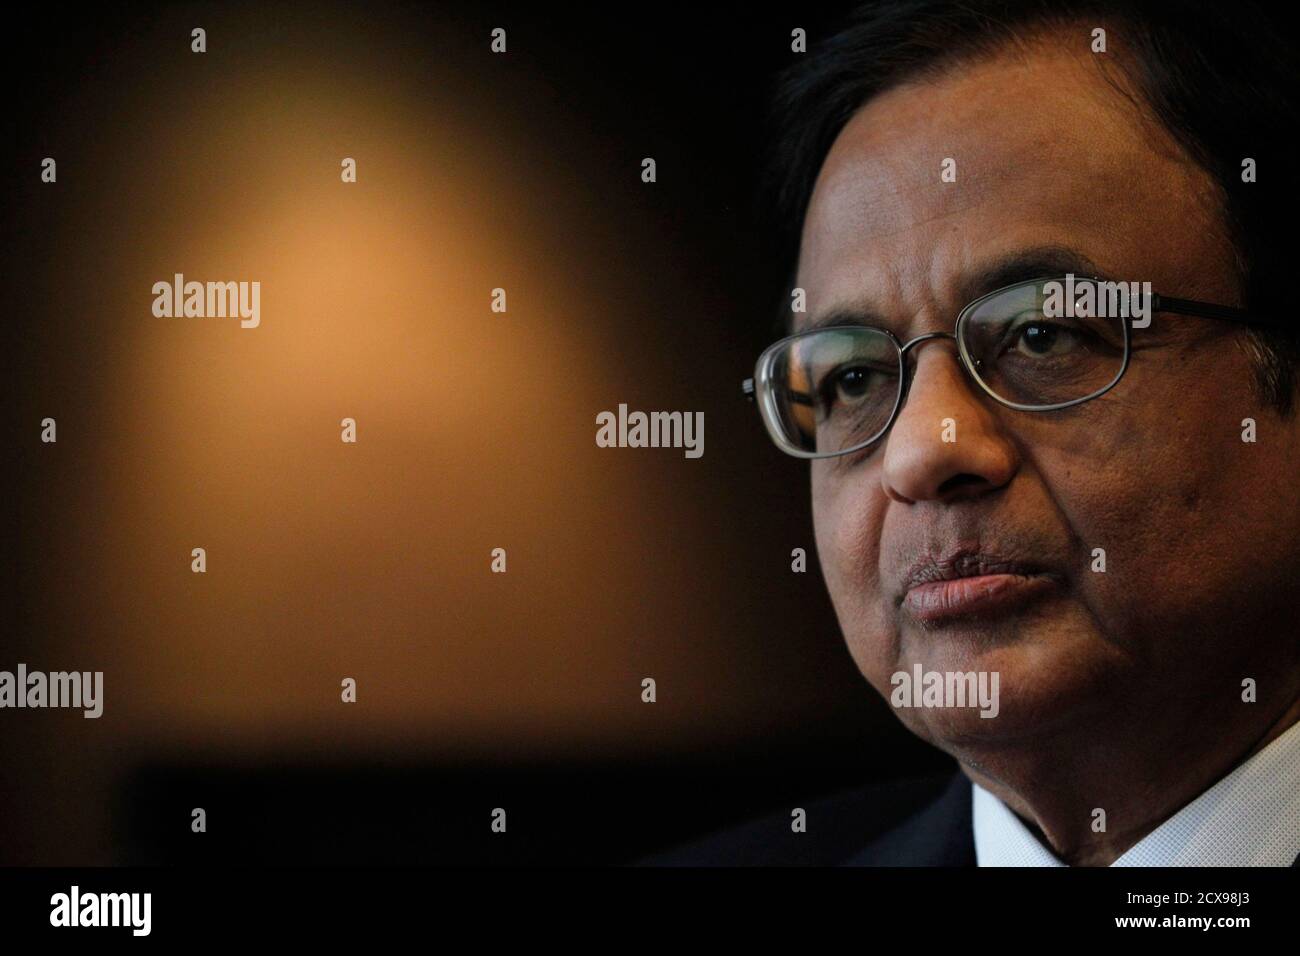 India's Finance Minister P. Chidambaram attends an interview with Reuters at a hotel during his visit for the G20 meeting in Mexico City November 4, 2012. India's economy should expand by 5.5 percent to 6.0 percent this year and growth should then return to 7 percent next year, Chidambaram told Reuters on Sunday, and said inflation was at an 'unacceptable level'. The G20 meeting of finance ministers and central bank governors in Mexico will take place from November 4 to 5. To match Interview INDIA-GDP/ REUTERS/Edgard Garrido (MEXICO - Tags: BUSINESS HEADSHOT POLITICS) Stock Photo